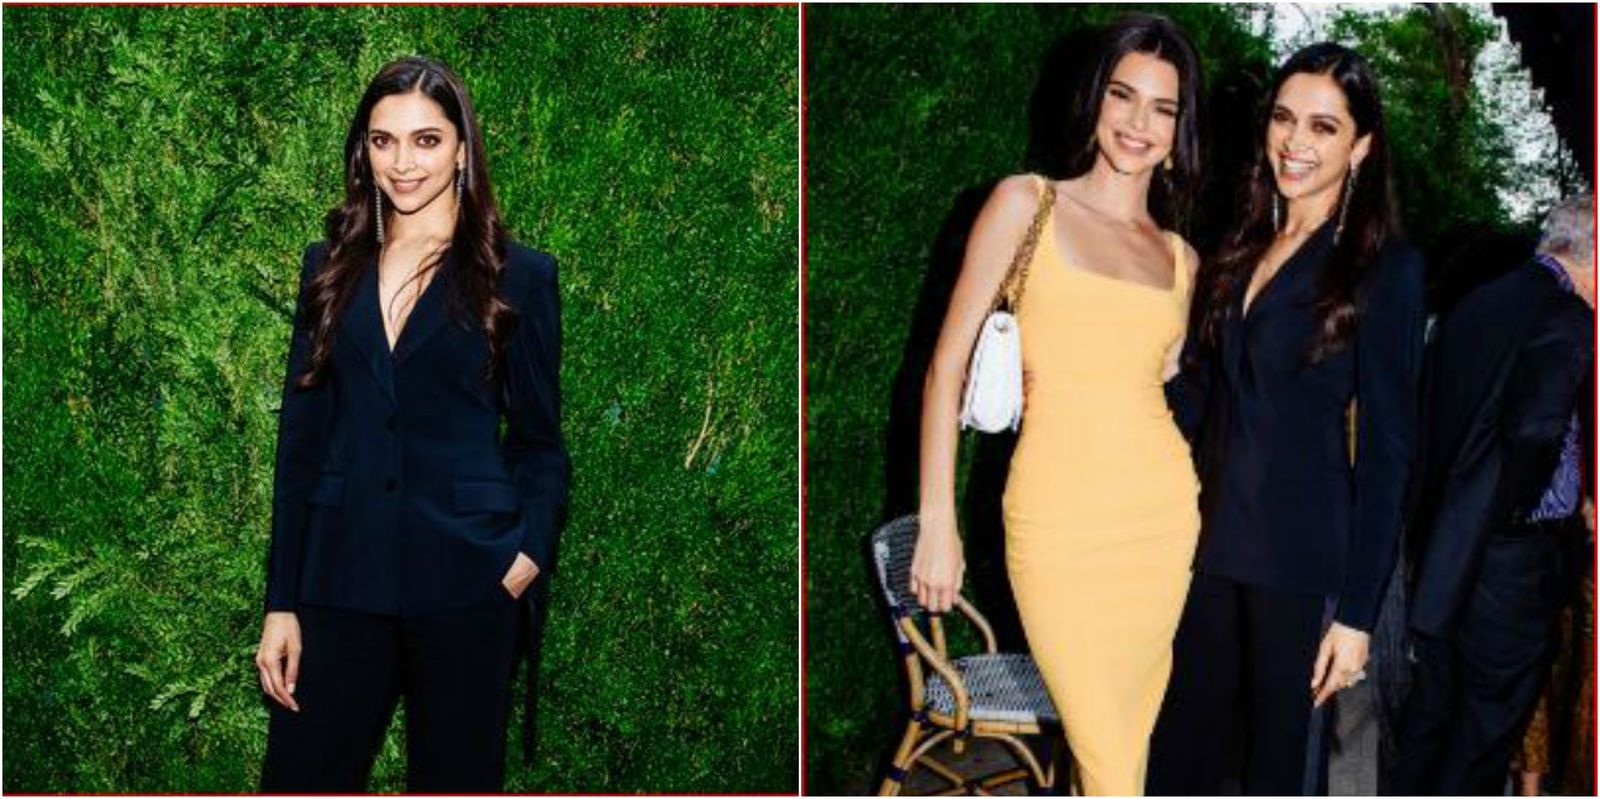 Get Deepika Padukone’s Polished Look That Would Be Perfect For Your Next Formal Party, Here’s How 